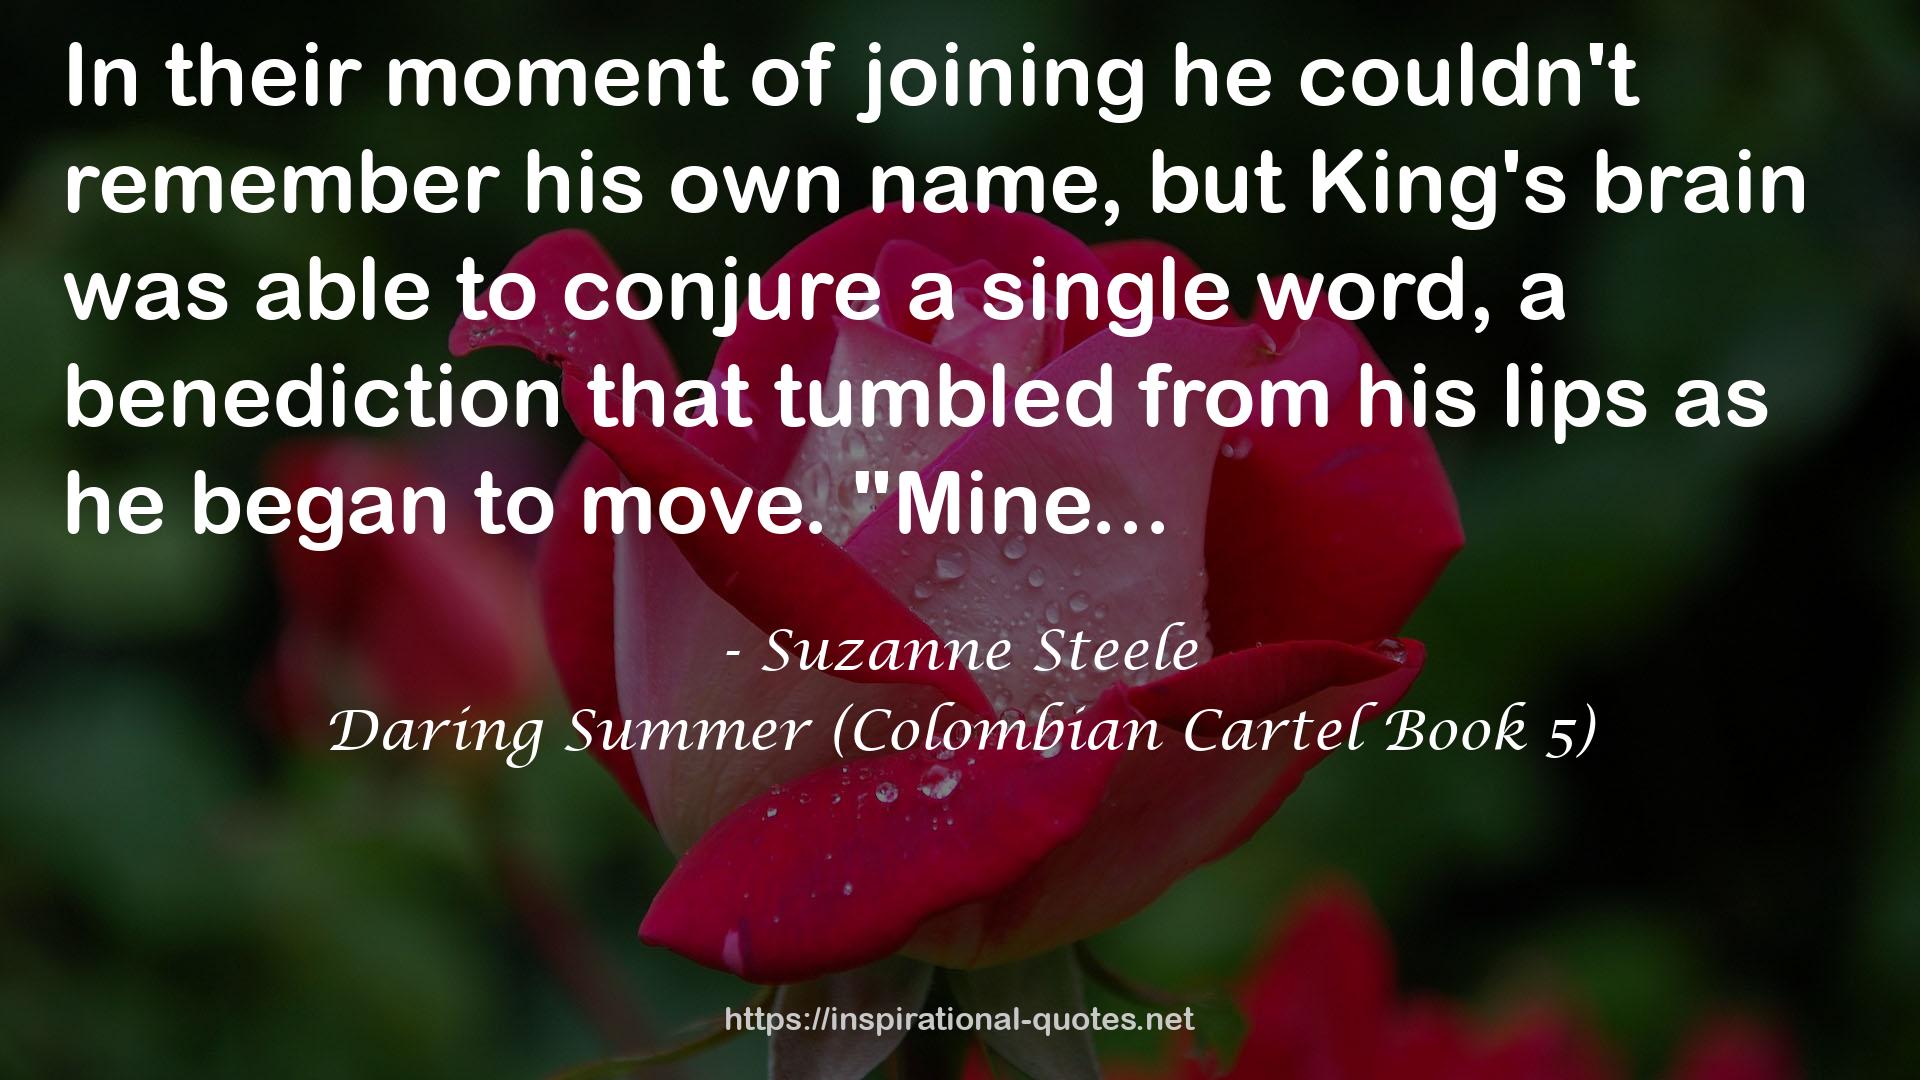 Daring Summer (Colombian Cartel Book 5) QUOTES